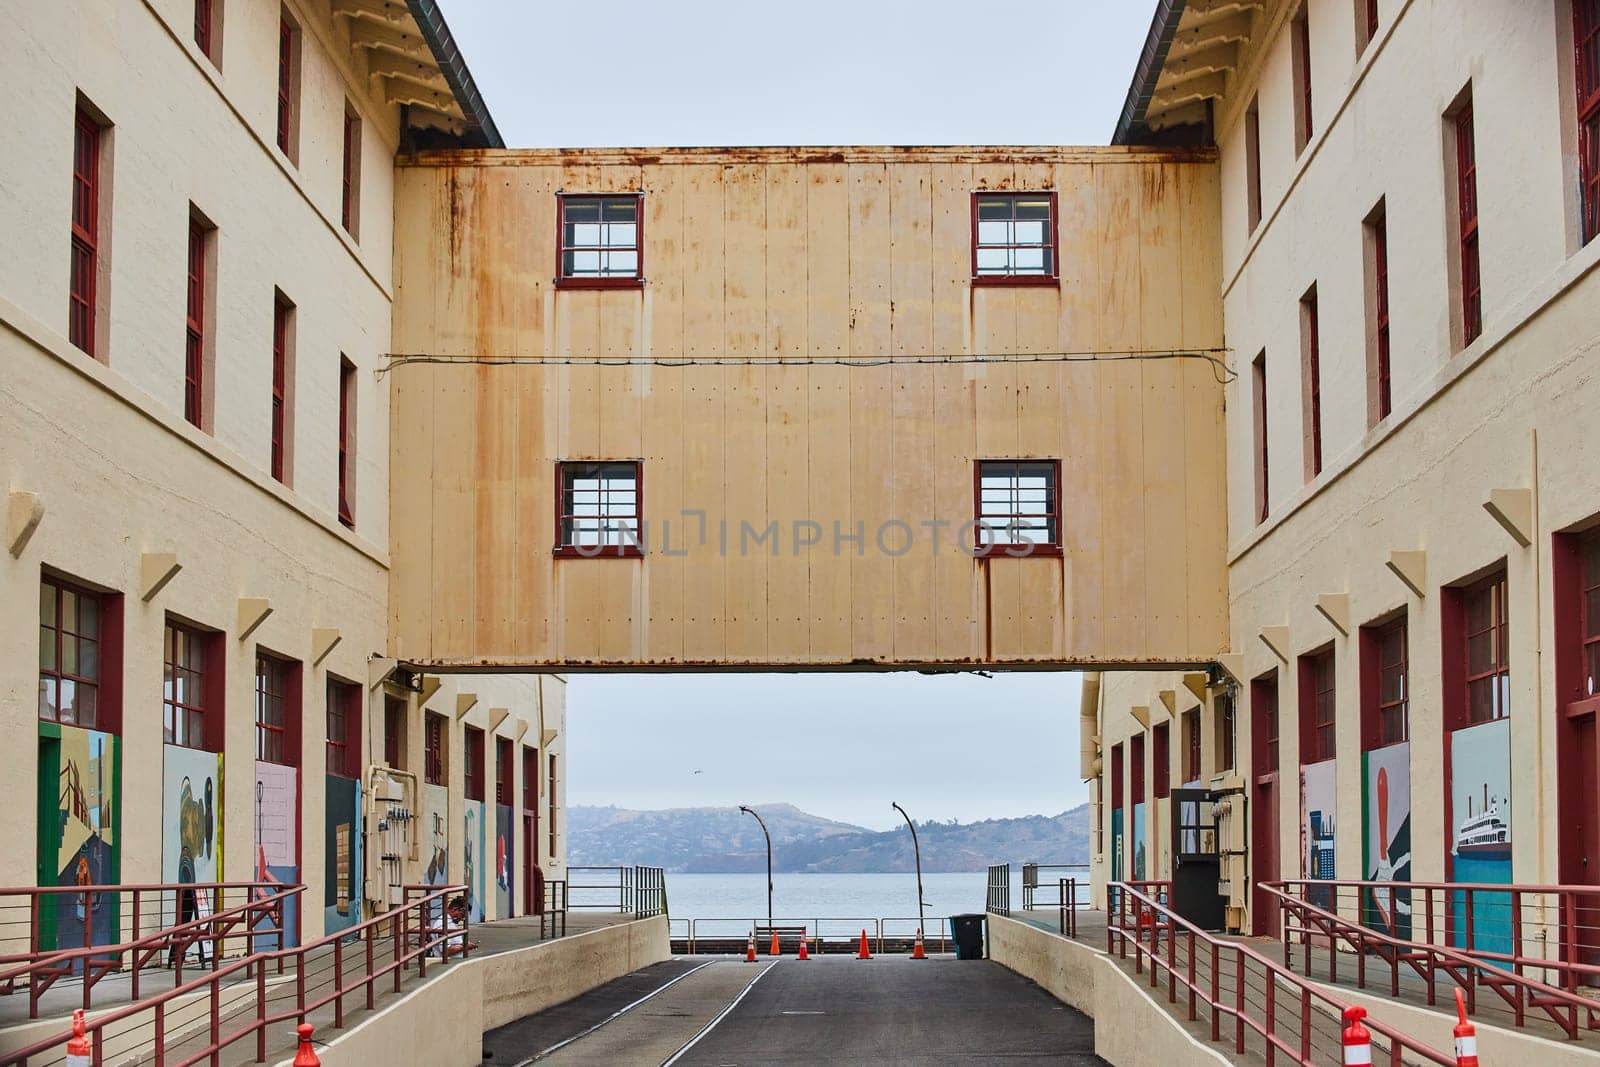 Image of Rusty bridge between two warehouse buildings with road underneath and view of San Francisco Bay